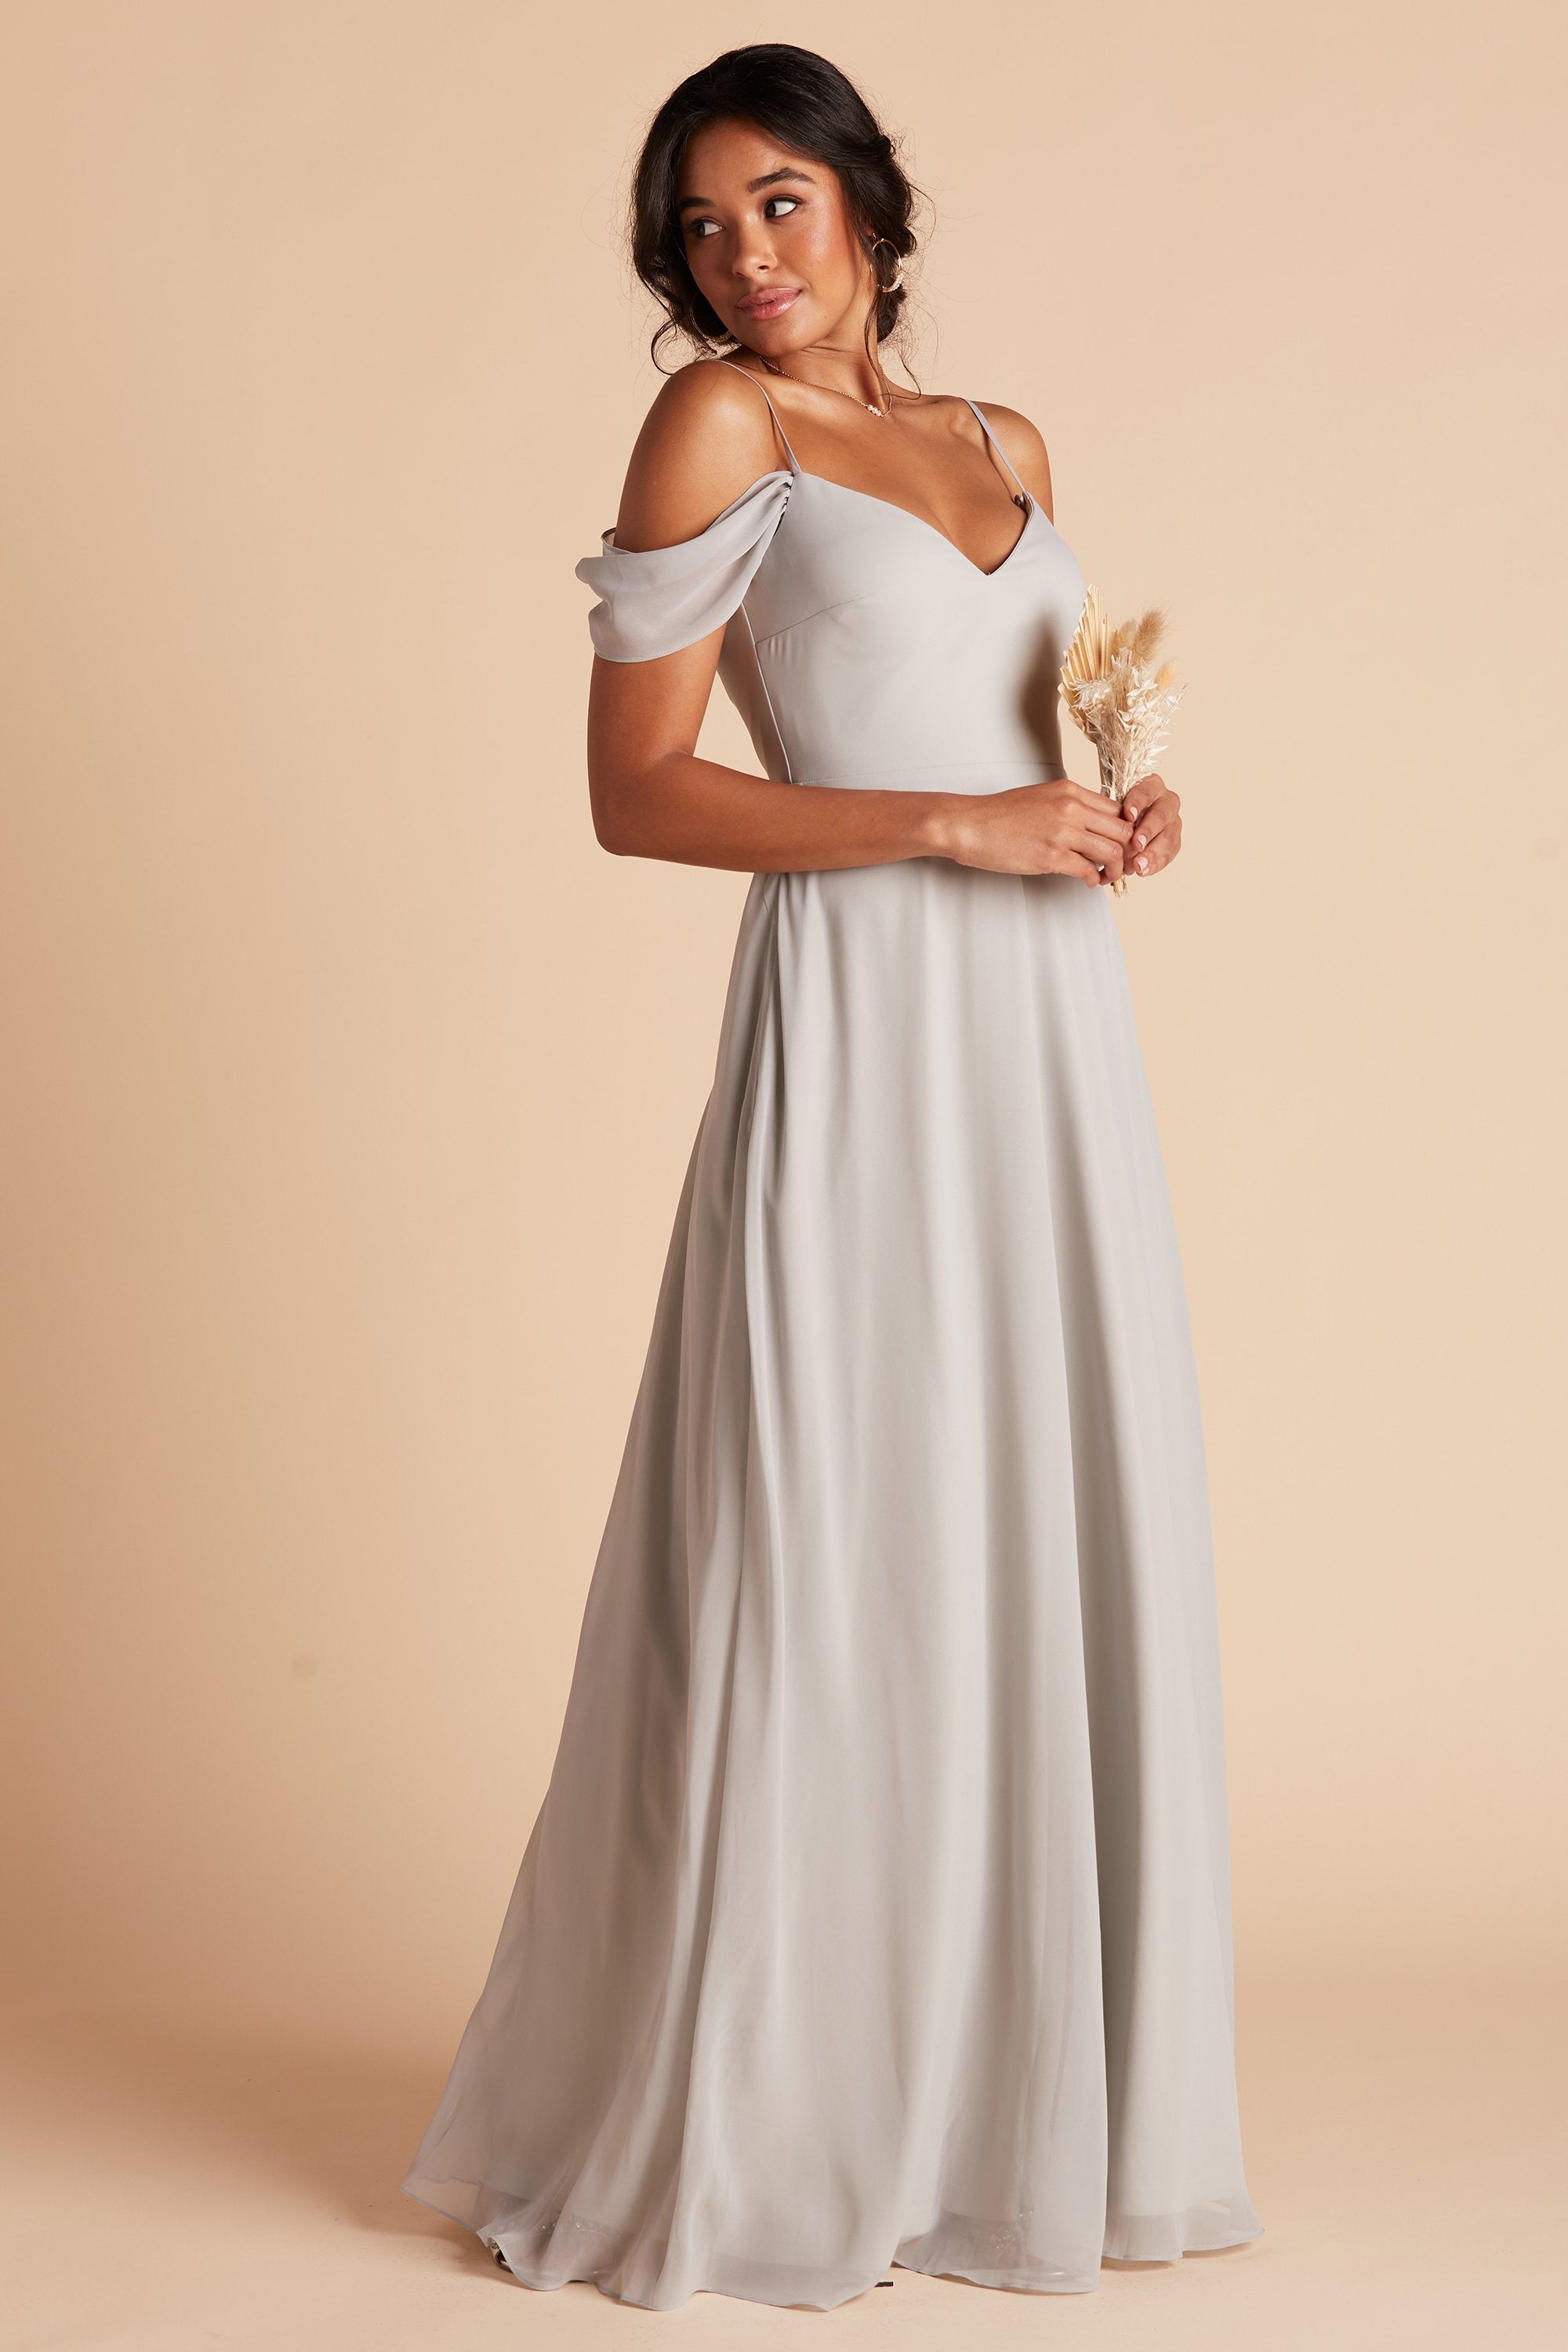 Devin convertible bridesmaid dress with slit in dove gray chiffon by Birdy Grey, side view